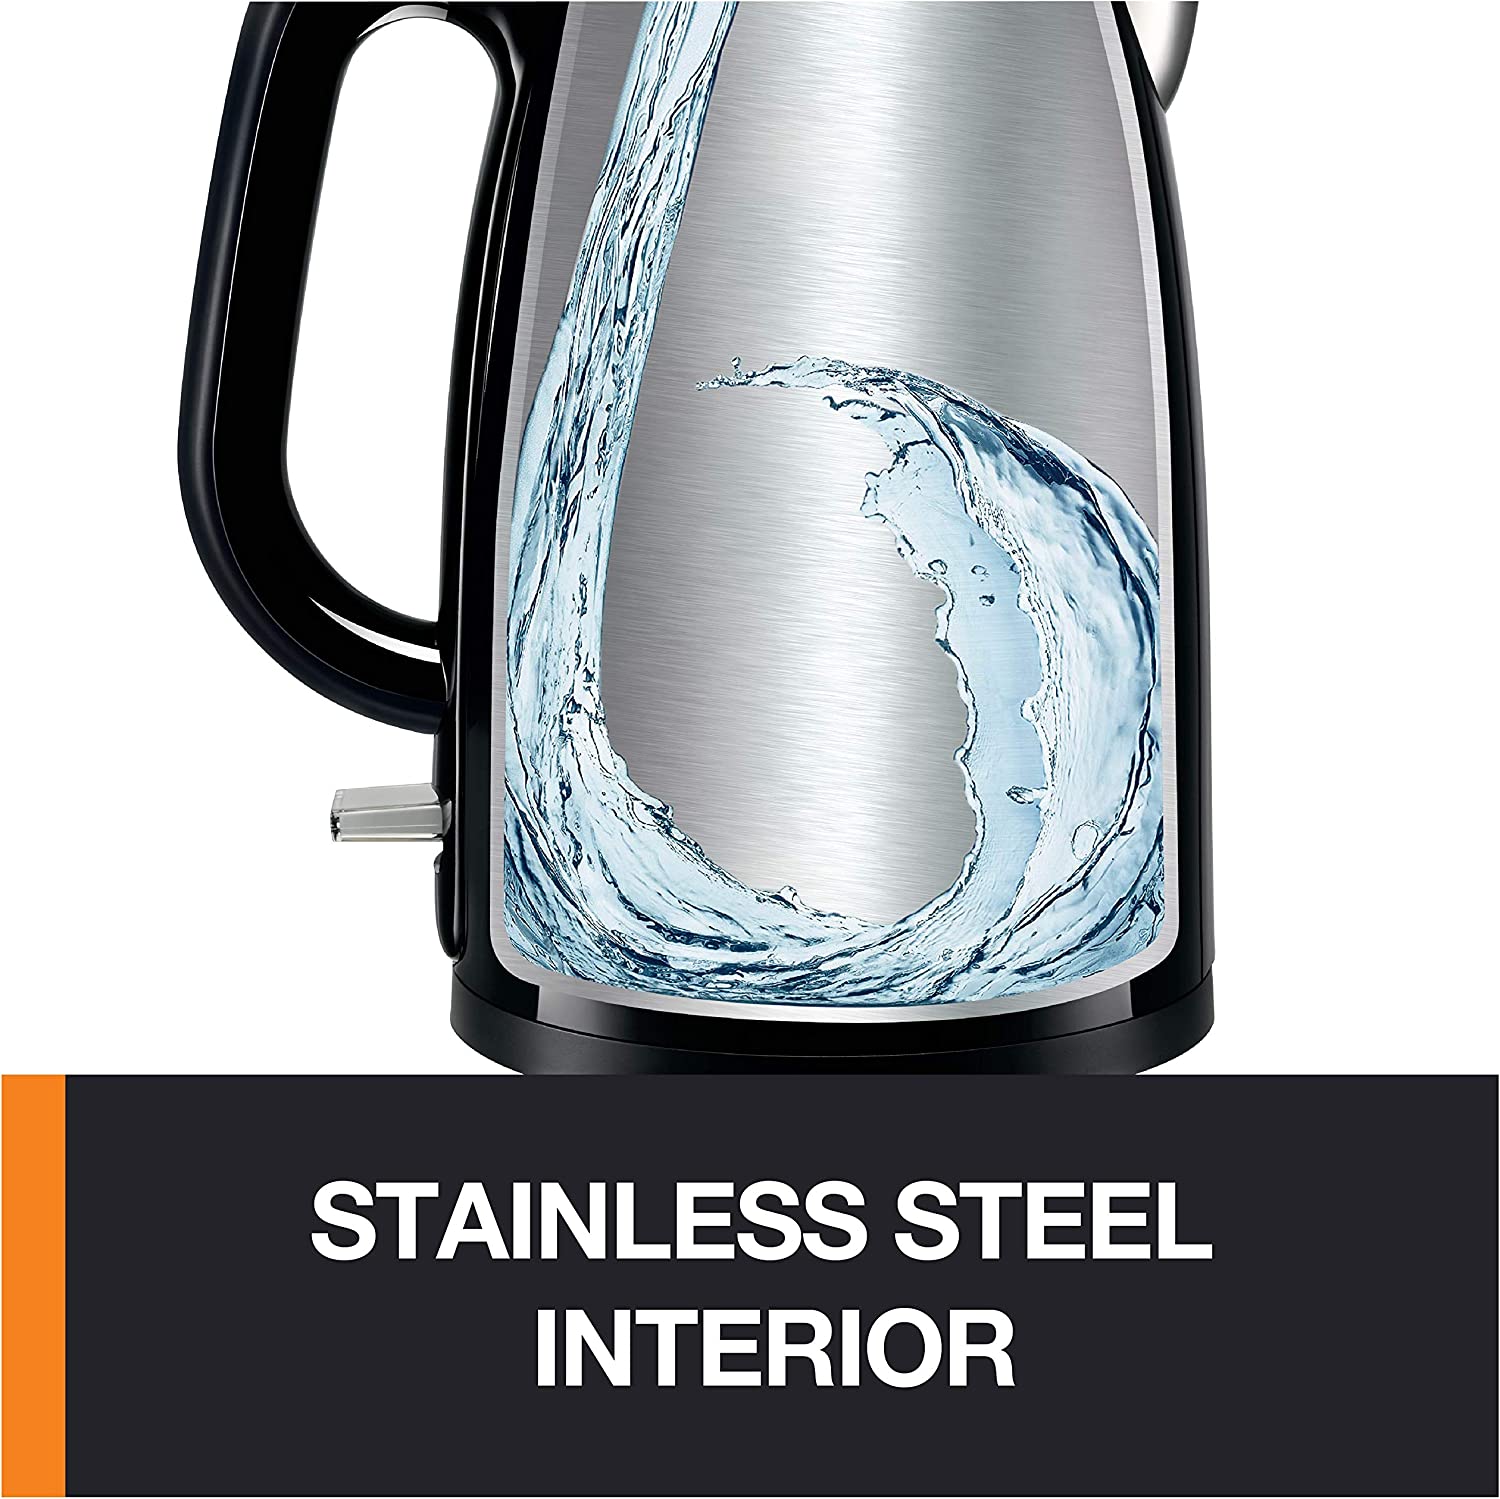 Stainless Steel Electric Kettle,1.5L Double Wall Cool Touch Tea